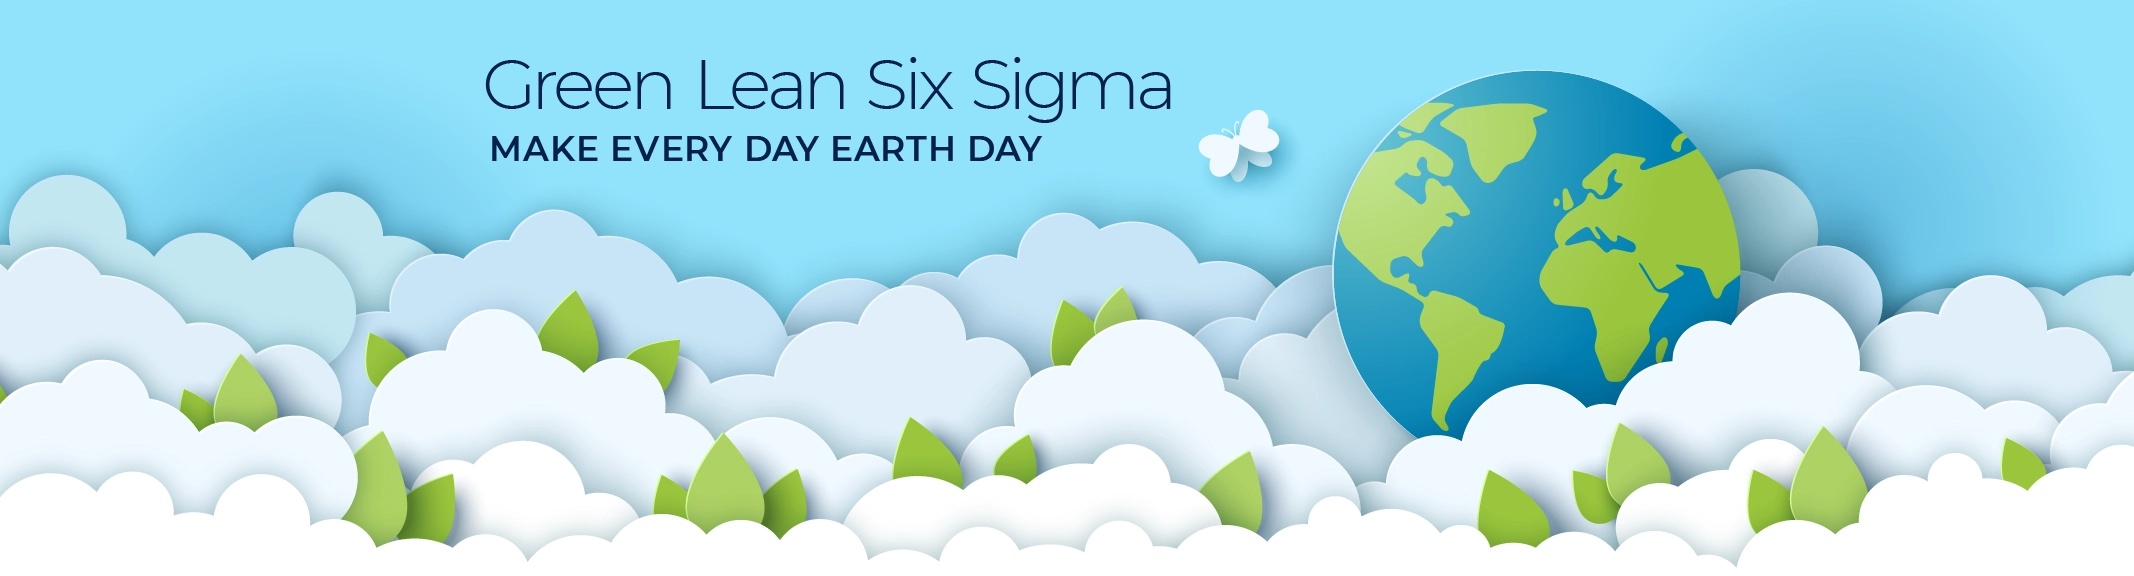 Green Lean Six Sigma - Make every day Earth Day.